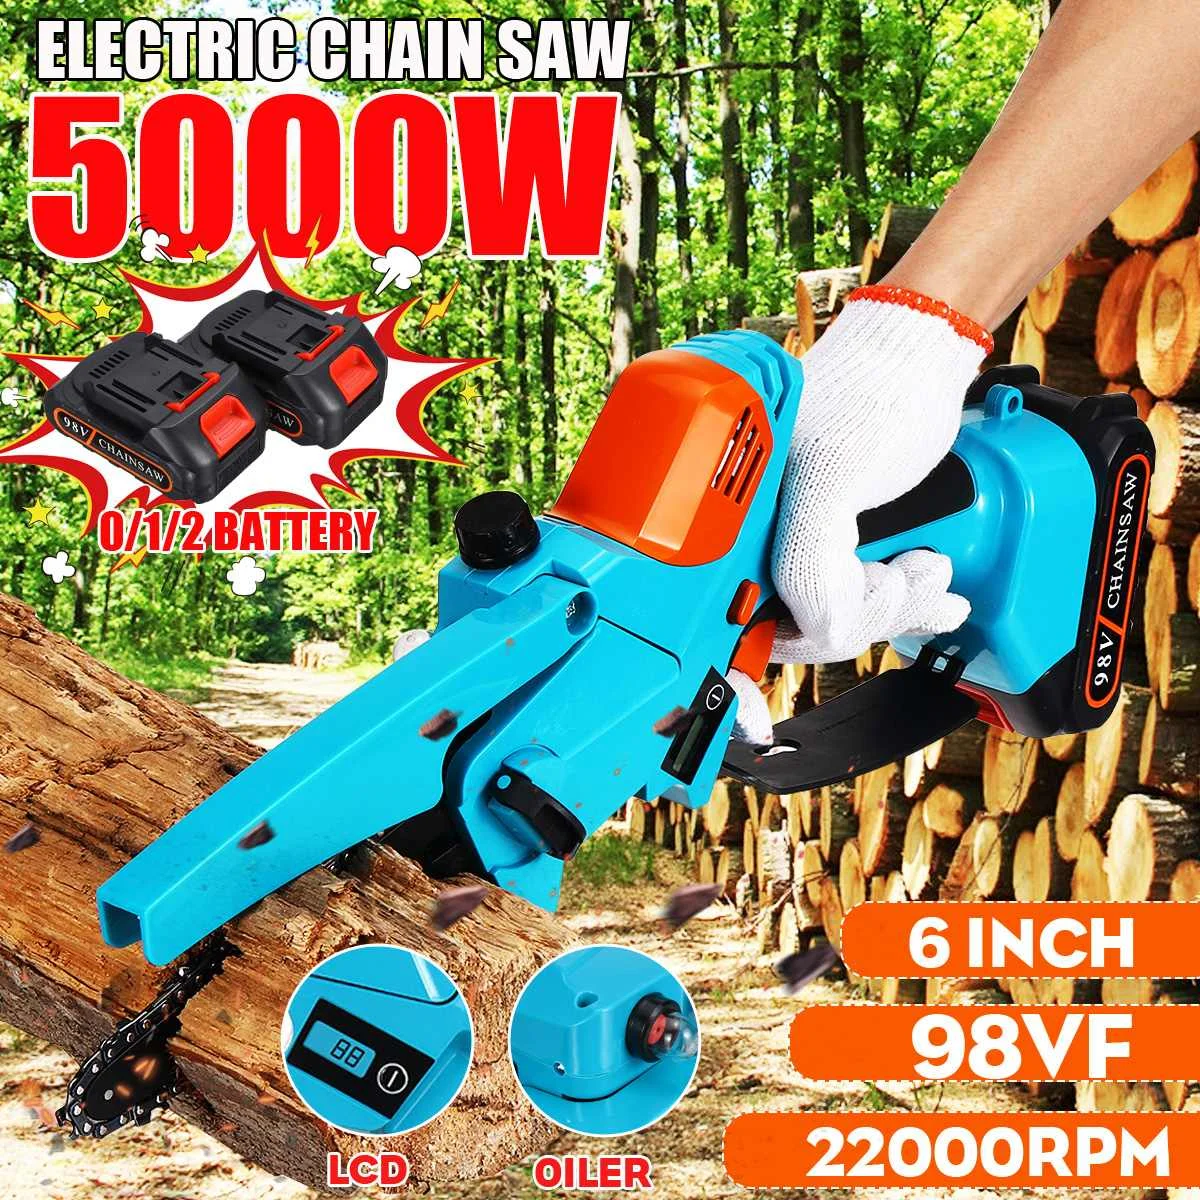 

5000W 6 Inch Mini Electric Chainsaw With 98VF Battery Rechargeable Garden Pruning Saw Woodworking Tool For Makita Battery